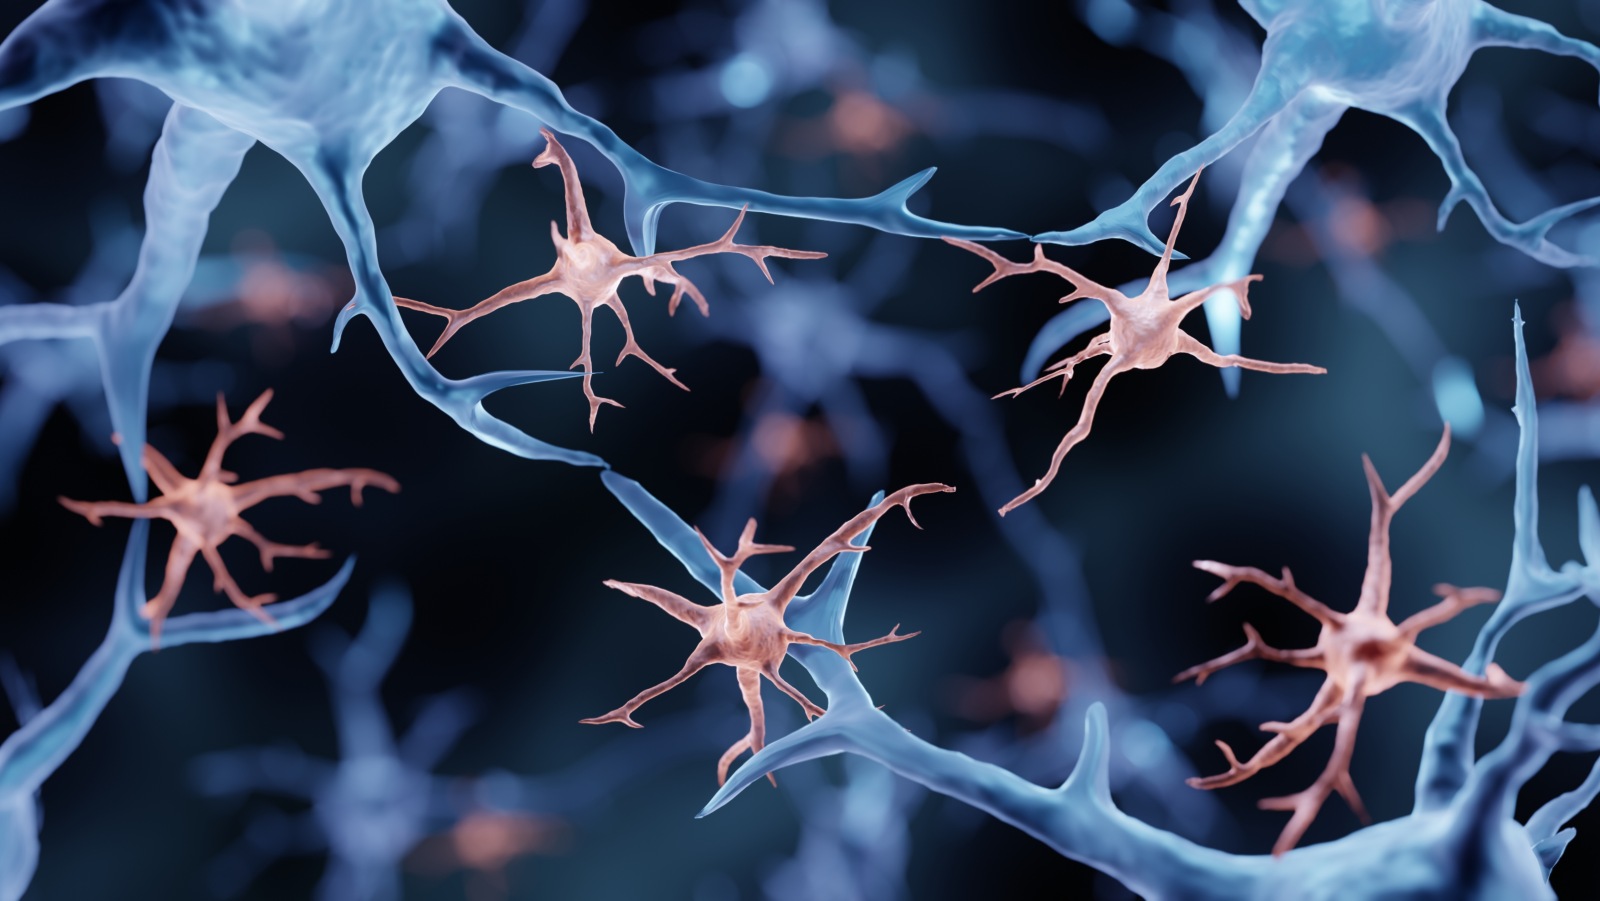 New research reveals how immune cells called microglia (pictured in pink among neurons) respond to injuries caused by multiple sclerosis, improving our understanding of how these cells work and potentially pointing toward new treatments to prevent brain damage. (Photo: Getty Images)